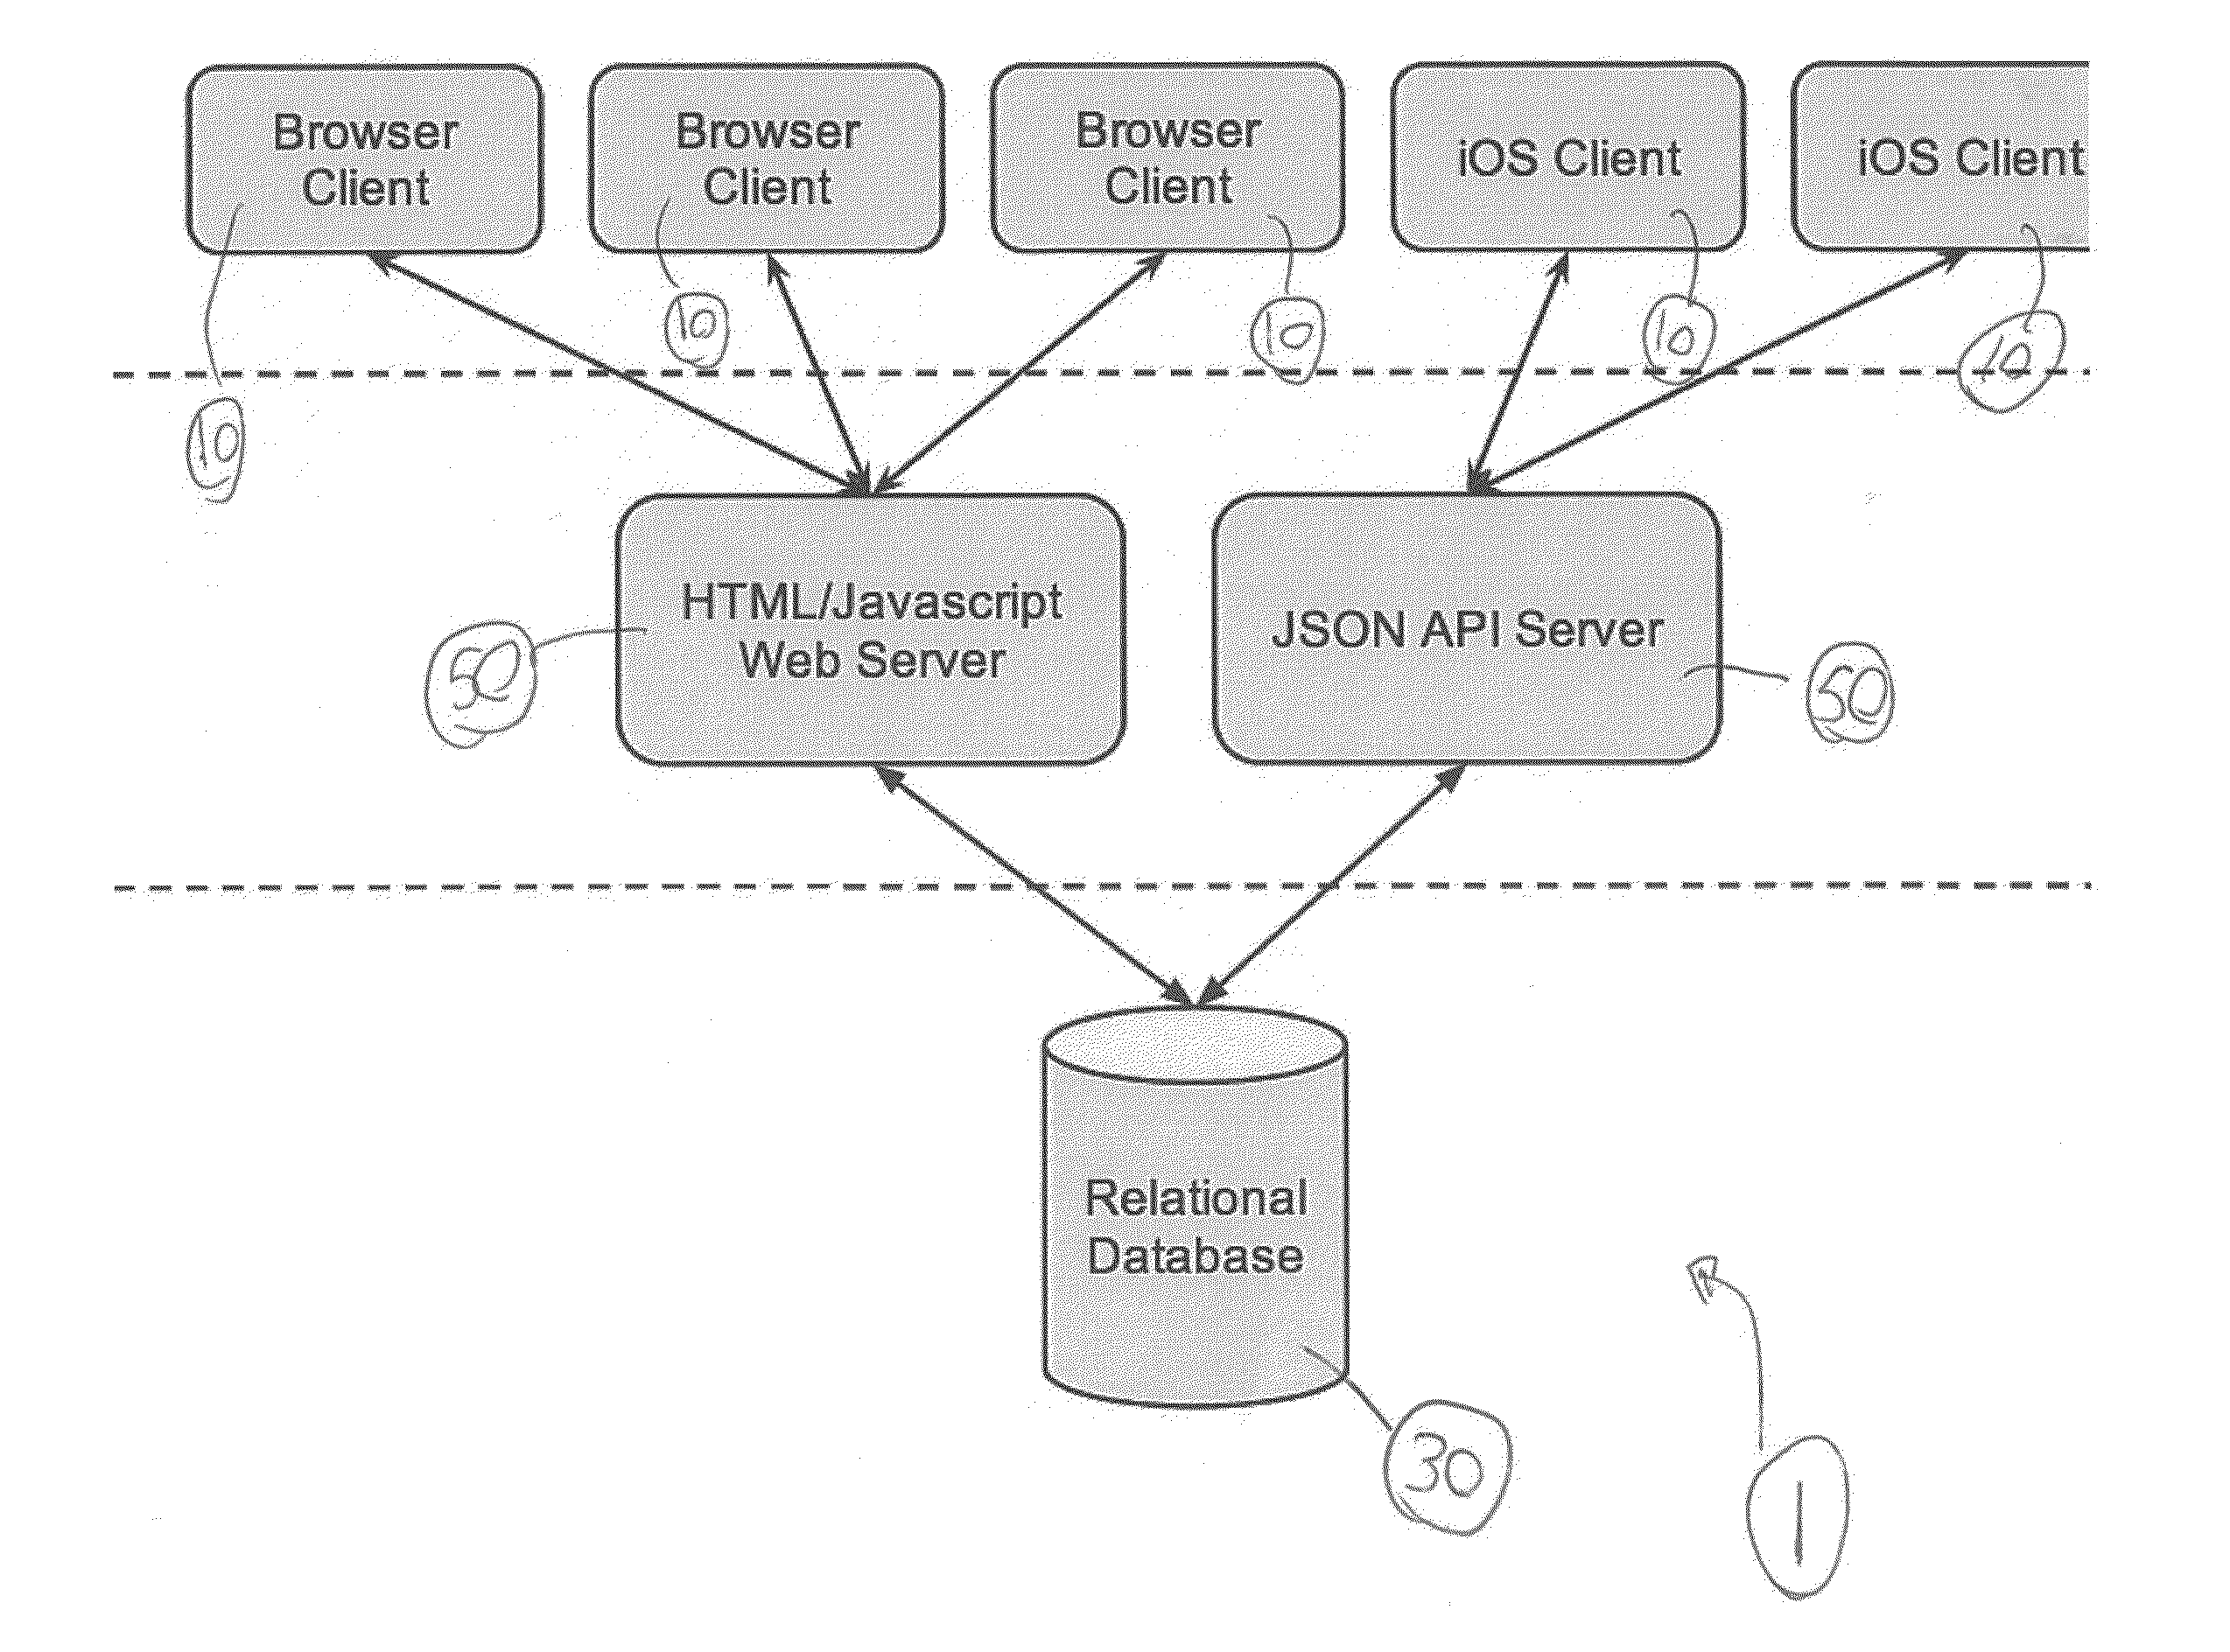 System for providing access over a network to users of training preferences of selected individuals